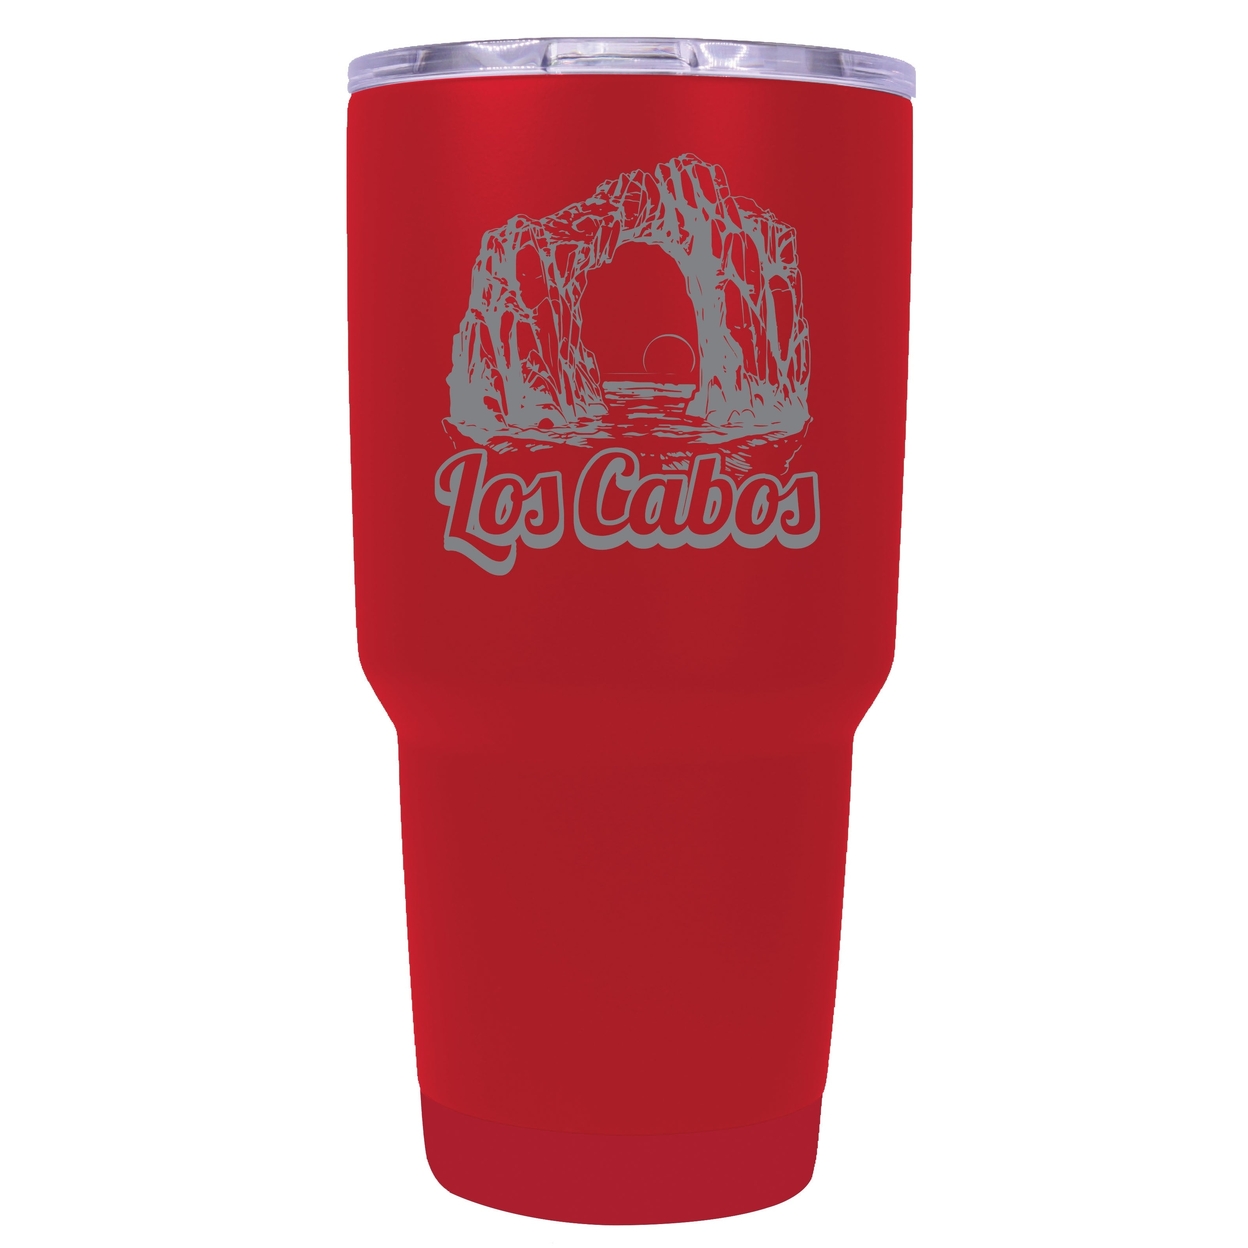 Los Cabos Mexico Souvenir 24 Oz Engraved Insulated Stainless Steel Tumbler - White,,4-Pack